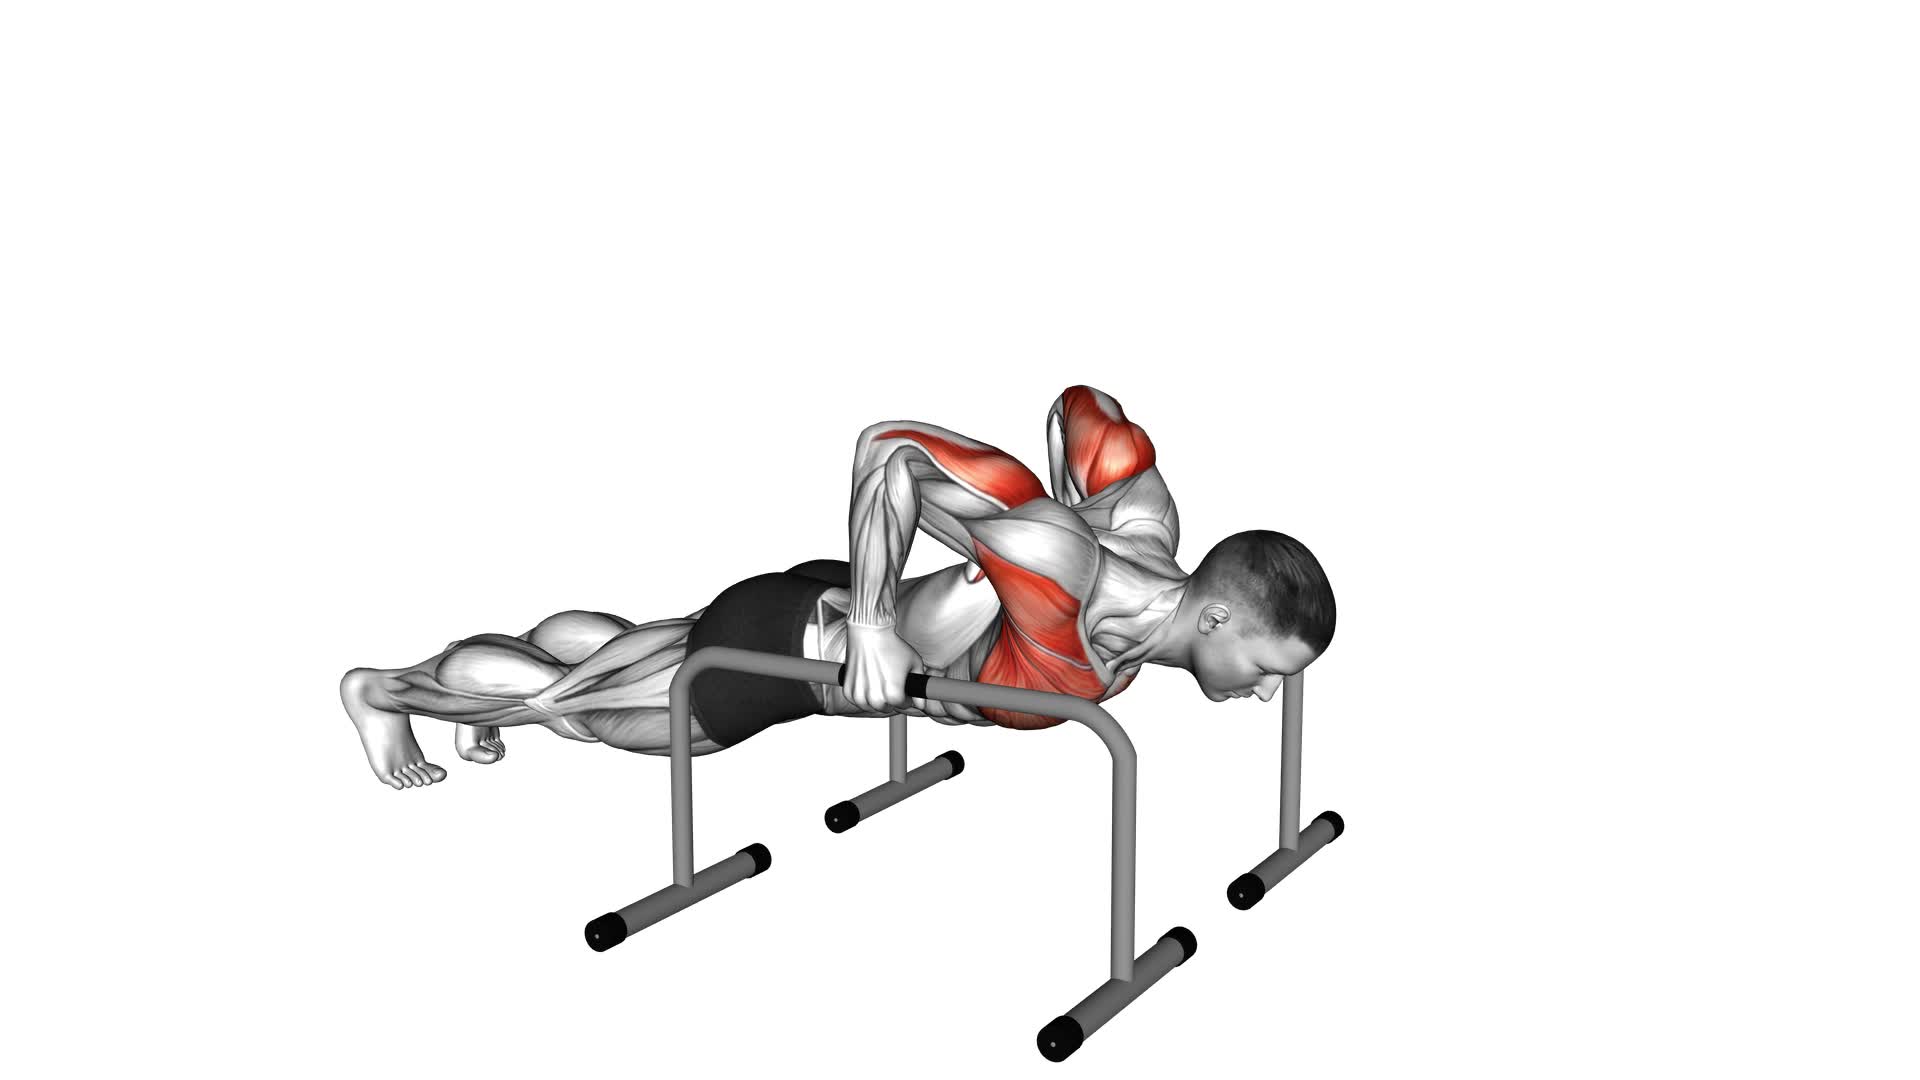 Deep Push-up on Parallel Bars (male) - Video Exercise Guide & Tips